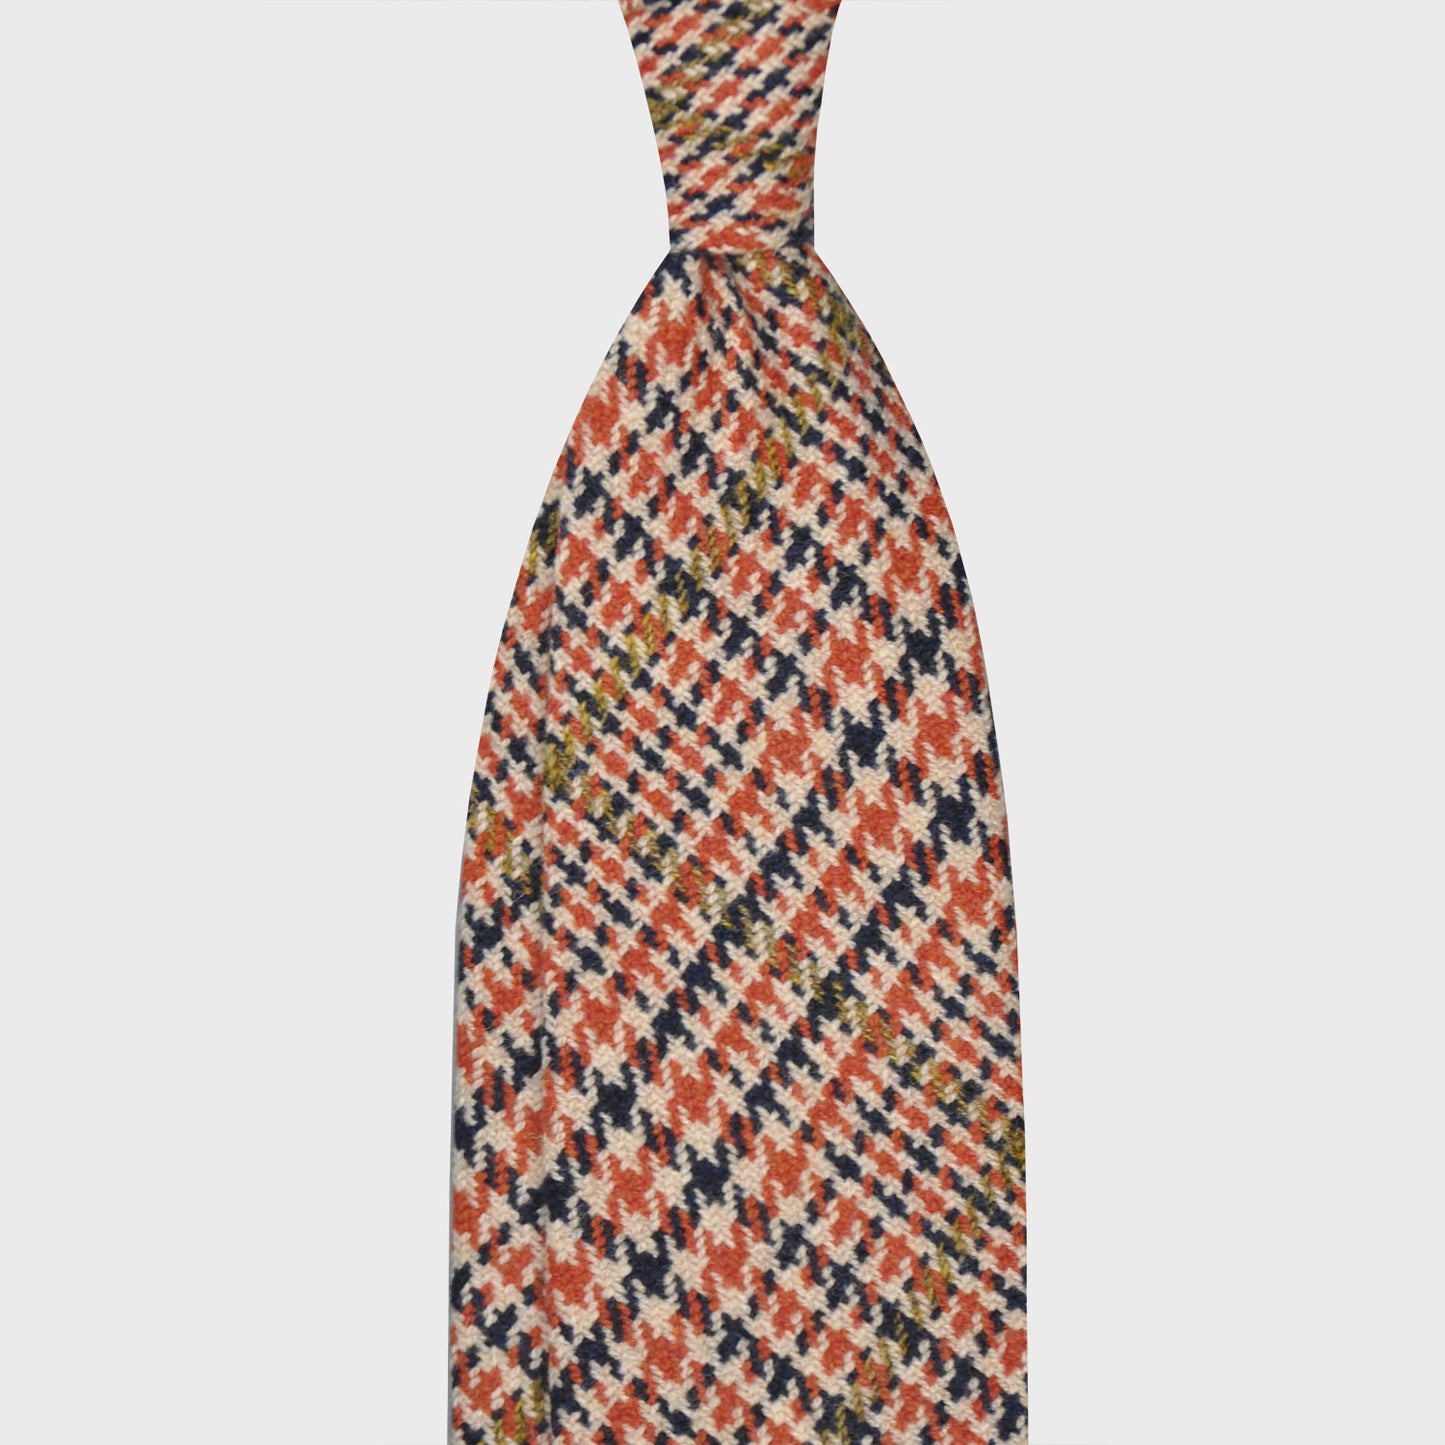 Load image into Gallery viewer, Orange Tweed Tie Handmade Unlined Houndstooth Pattern. Houndstooth tweed wool tie, F Marino ties for Wools Boutique Uomo, light tweed soft texture to the touch, 3 folds, orange, navy blue, olive green houndstooth pattern
